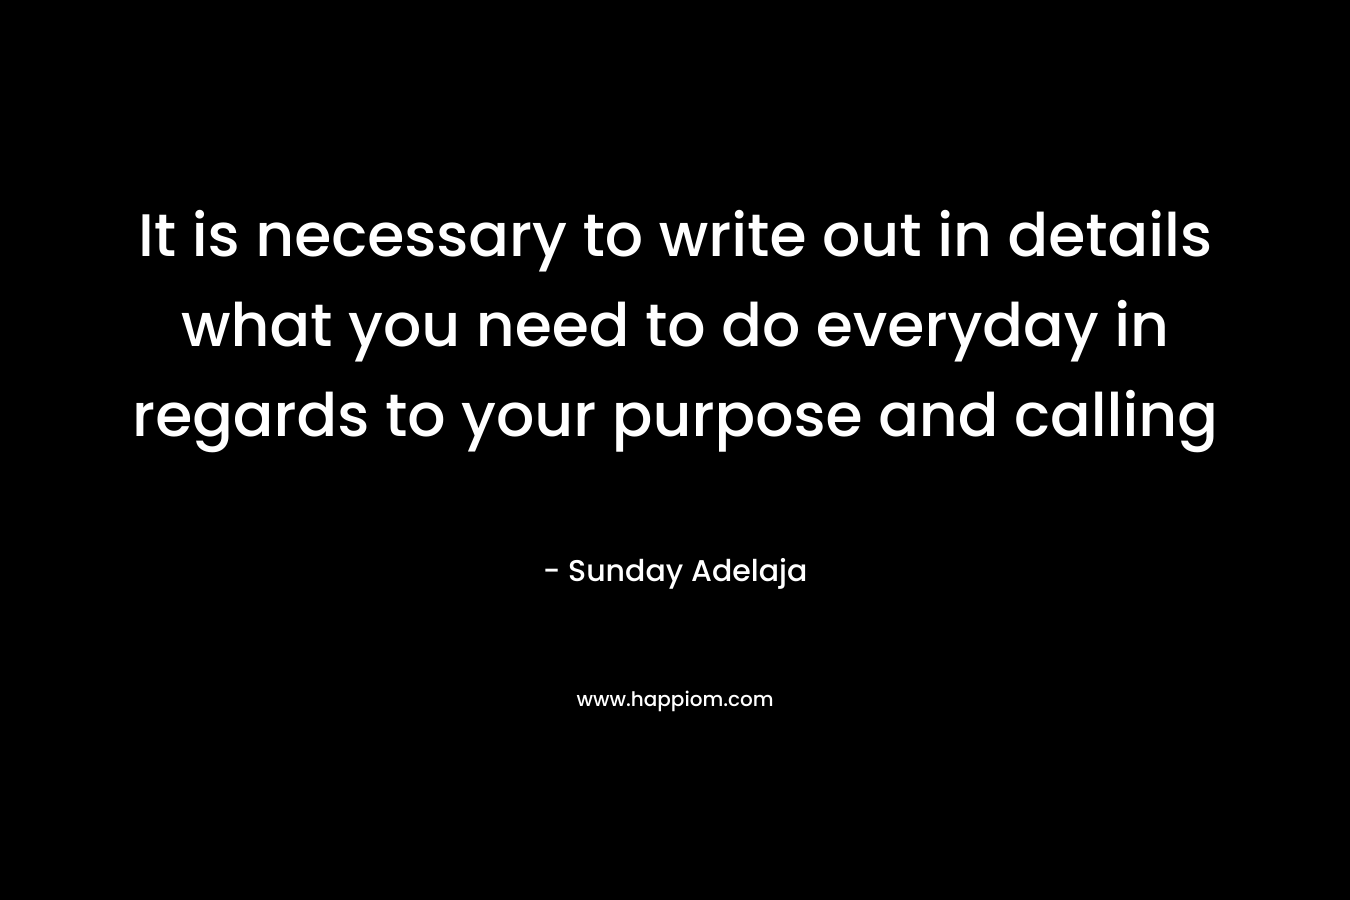 It is necessary to write out in details what you need to do everyday in regards to your purpose and calling